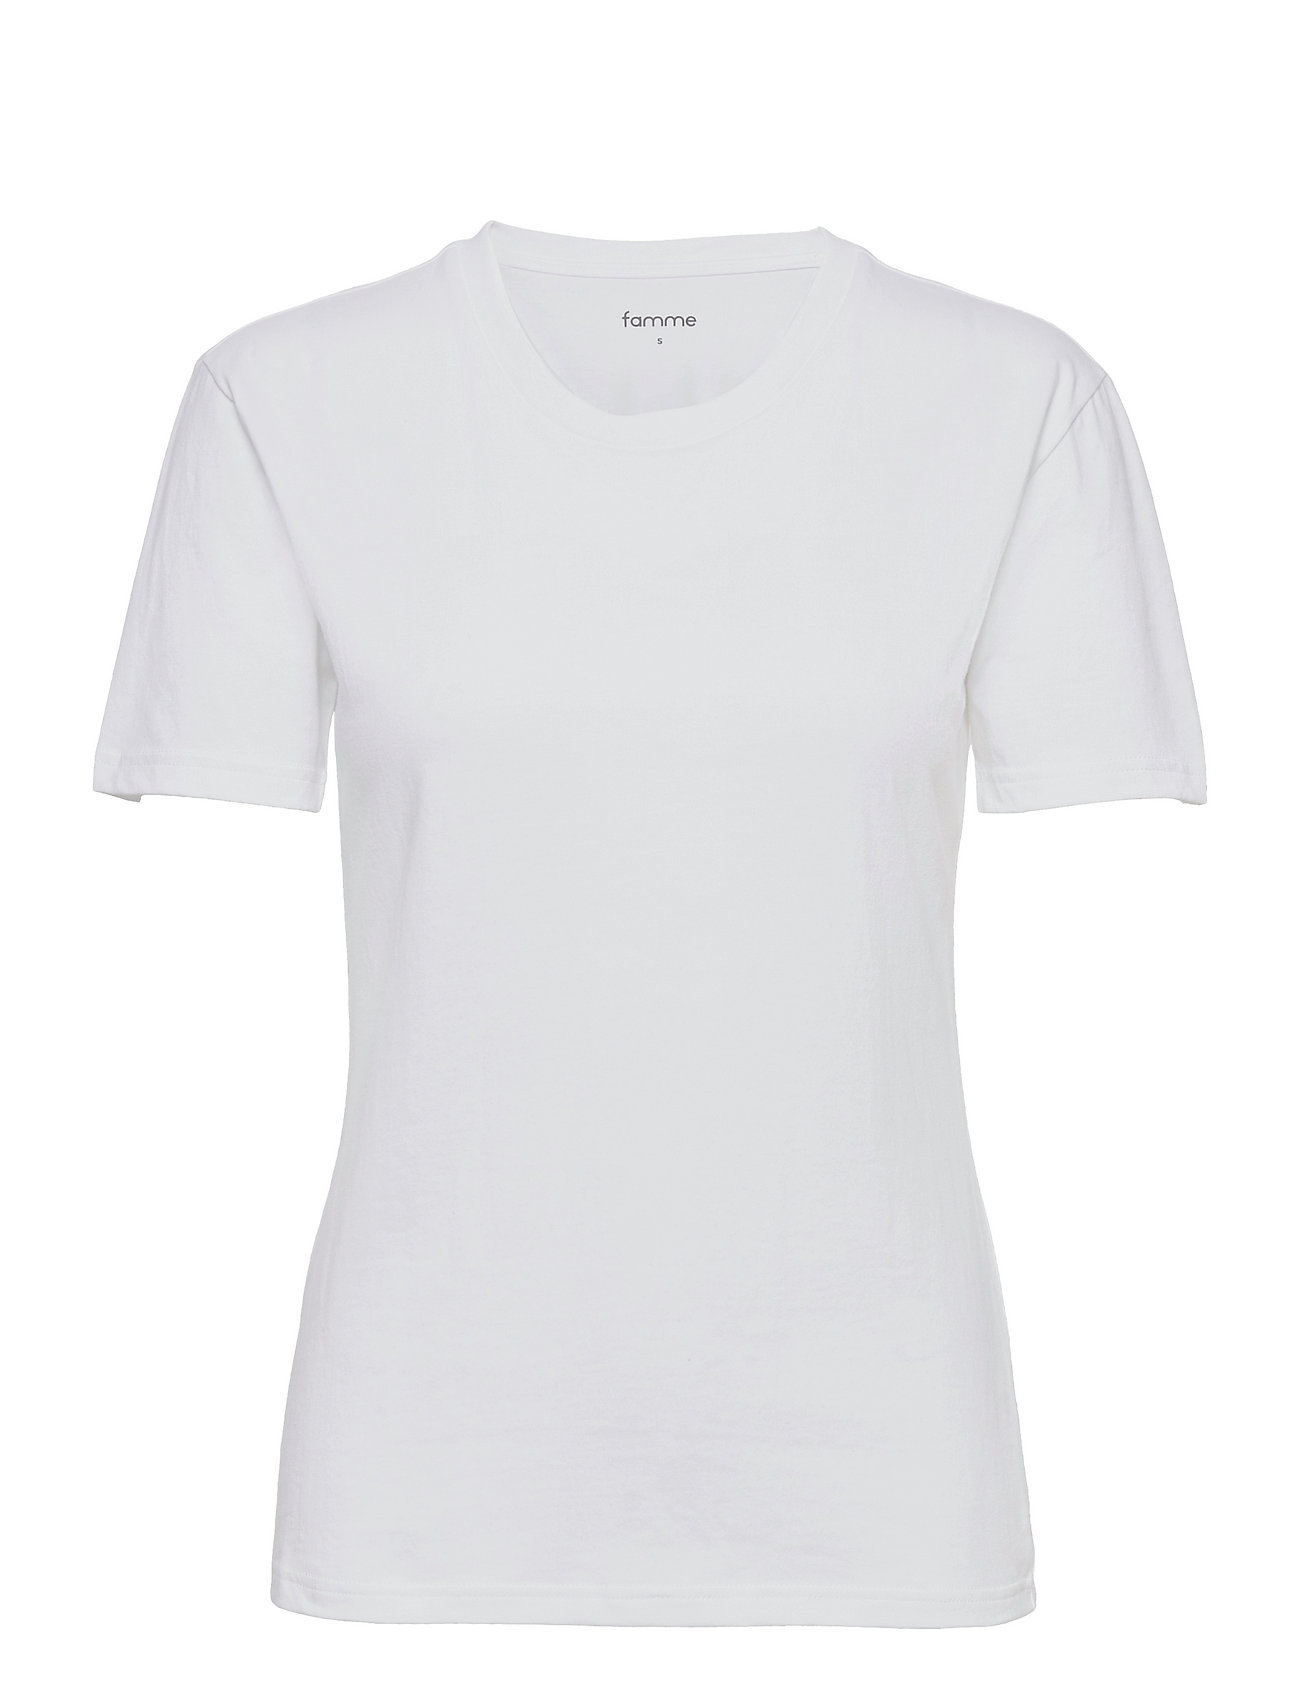 Pure Slim Fit T-Shirt Sport T-shirts & Tops Short-sleeved White Famme